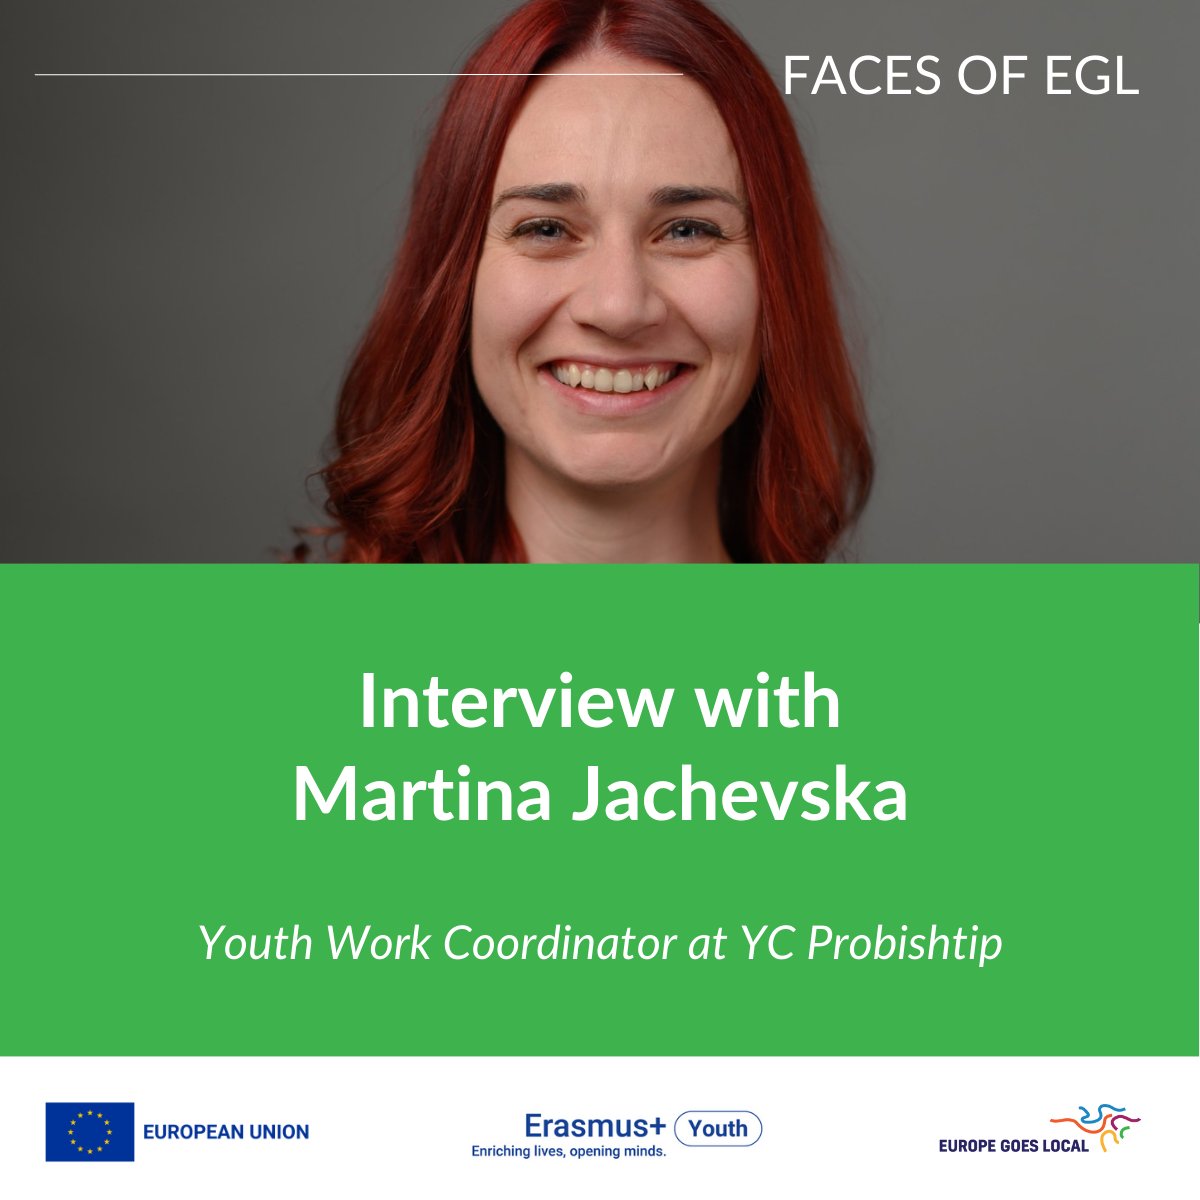 📣Meet Martina Jachevska from Youth Center Probishtip! Together with our series on good practices in #localyouthwork, here is also a story about a passionate youth worker and social change-maker. Read our Faces of EGL article here 👉europegoeslocal.eu/egl-action/mar…